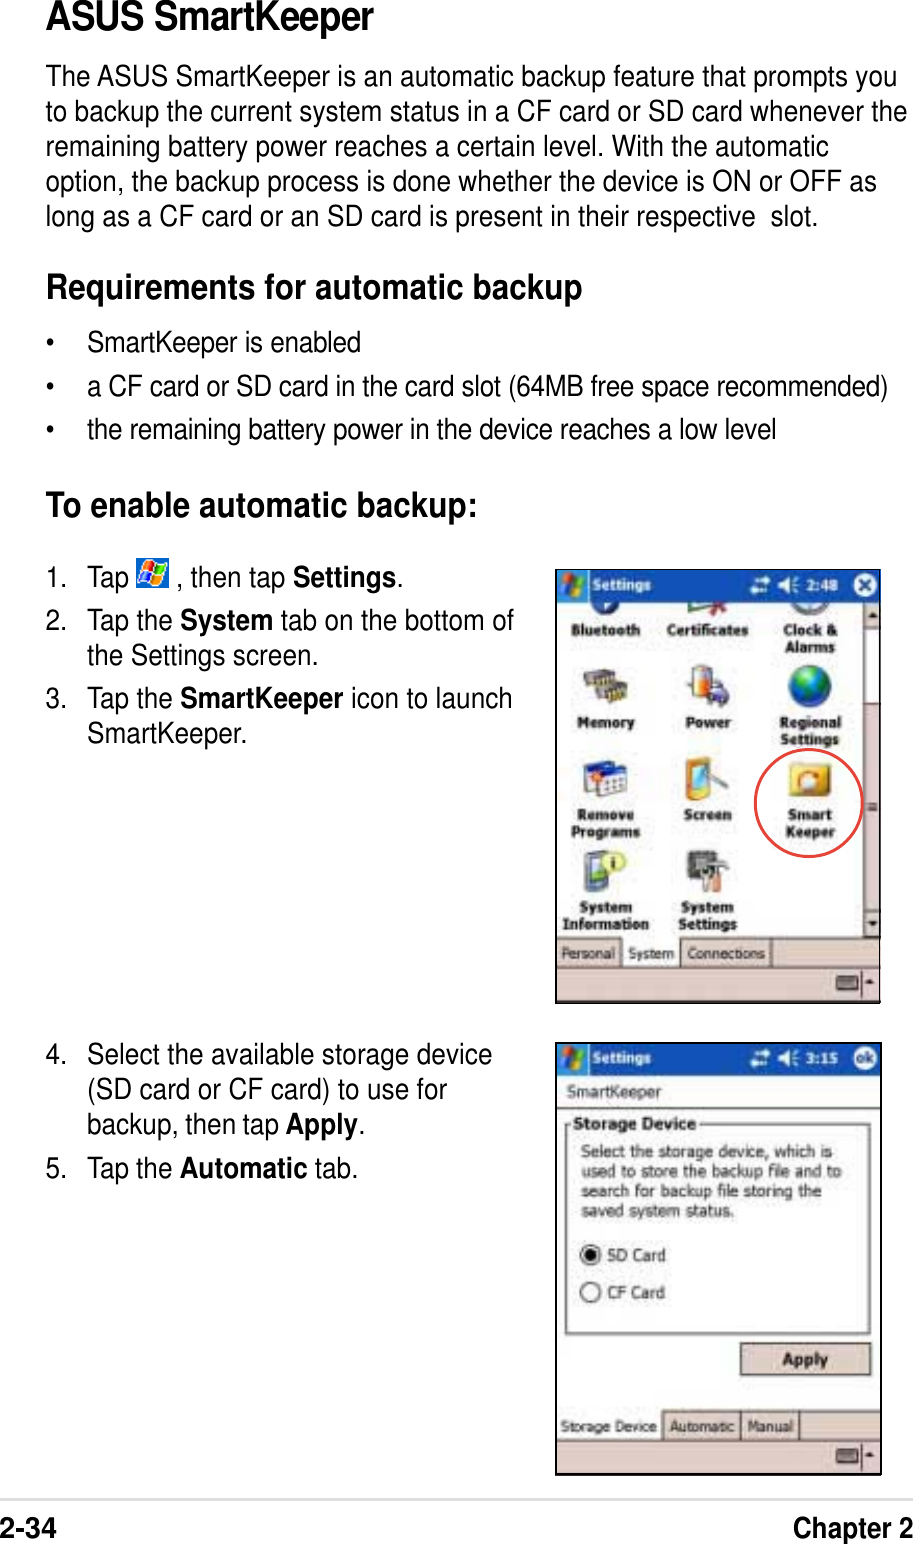 2-34Chapter 2ASUS SmartKeeperThe ASUS SmartKeeper is an automatic backup feature that prompts youto backup the current system status in a CF card or SD card whenever theremaining battery power reaches a certain level. With the automaticoption, the backup process is done whether the device is ON or OFF aslong as a CF card or an SD card is present in their respective  slot.Requirements for automatic backup• SmartKeeper is enabled• a CF card or SD card in the card slot (64MB free space recommended)• the remaining battery power in the device reaches a low levelTo enable automatic backup:1. Tap   , then tap Settings.2. Tap the System tab on the bottom ofthe Settings screen.3. Tap the SmartKeeper icon to launchSmartKeeper.4. Select the available storage device(SD card or CF card) to use forbackup, then tap Apply.5. Tap the Automatic tab.